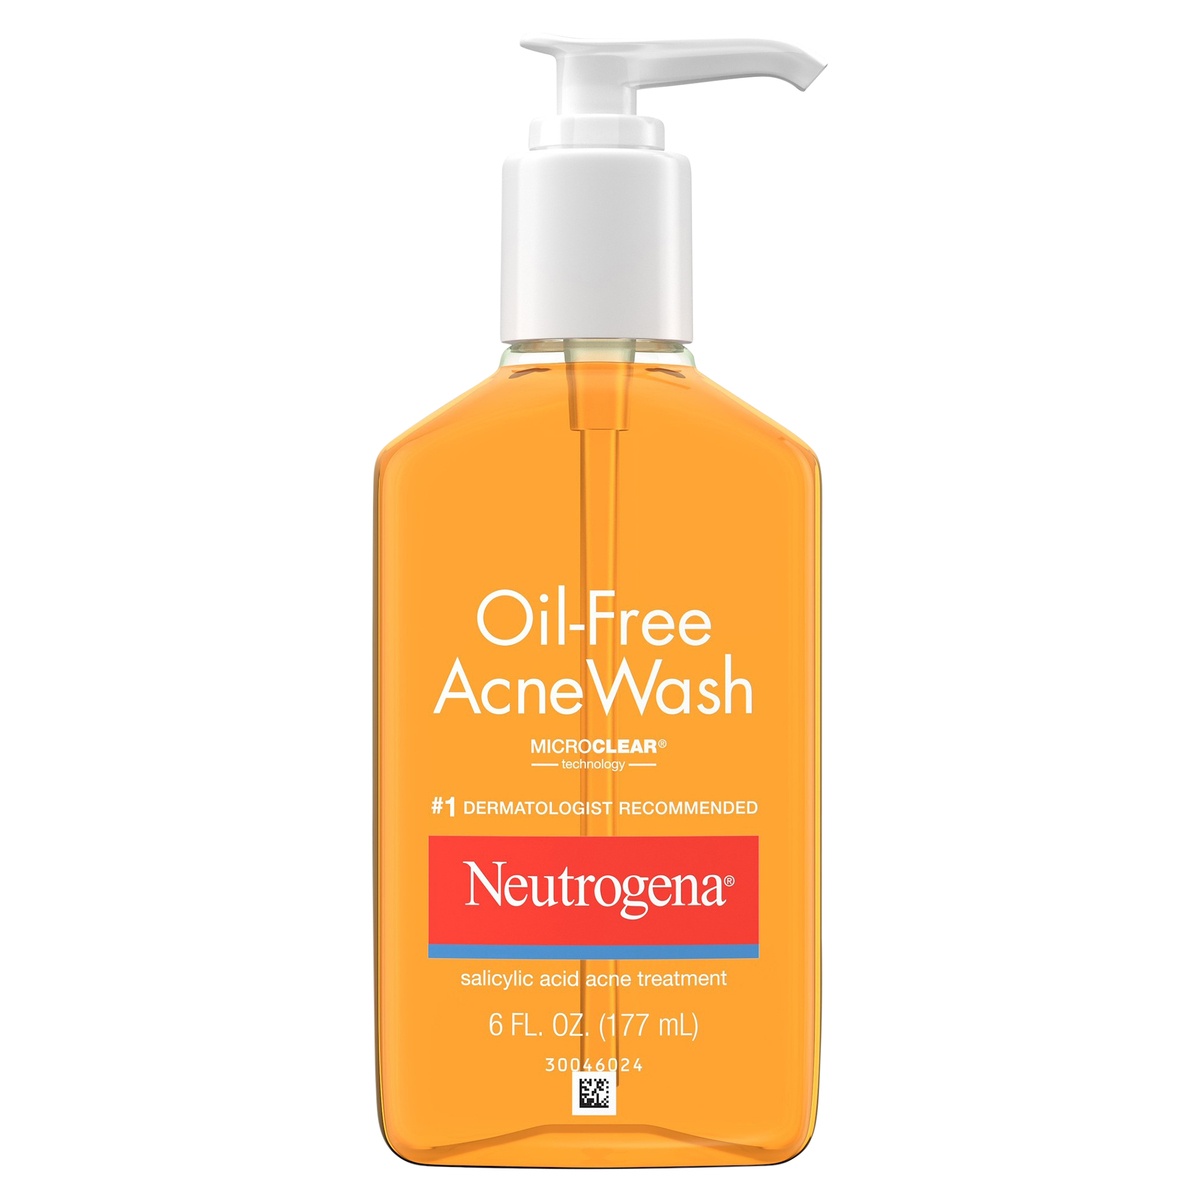 slide 1 of 8, Neutrogena Oil-Free Acne Fighting Facial Cleanser, 2% Salicylic Acid Acne Treatment, Daily Oil-Free Acne Face Wash for Acne-Prone Skin with Salicylic Acid Acne Medicine, 6 oz